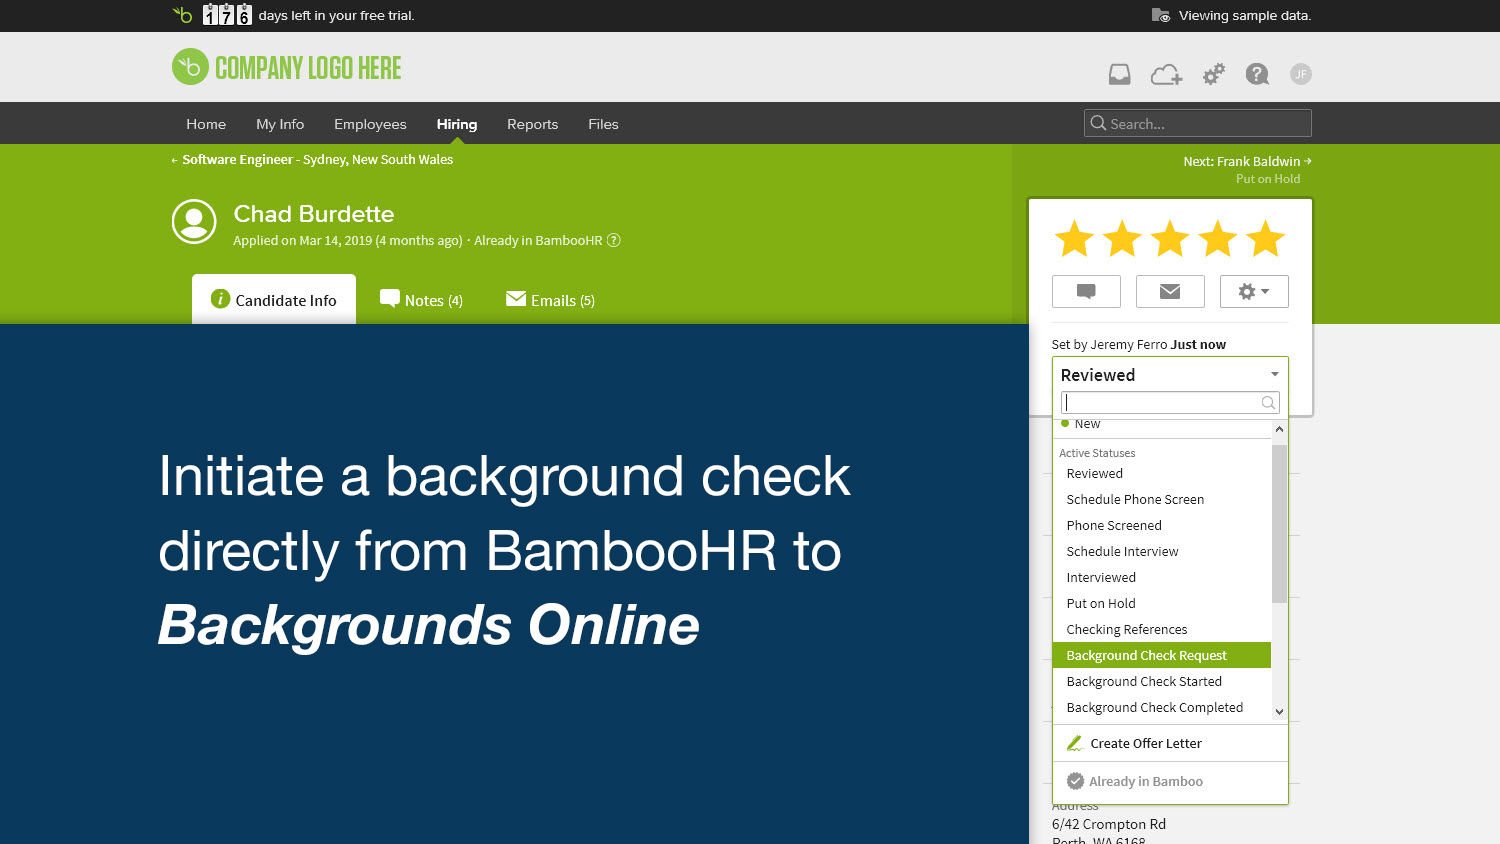 Run and review background checks via ATS - Backgrounds Online